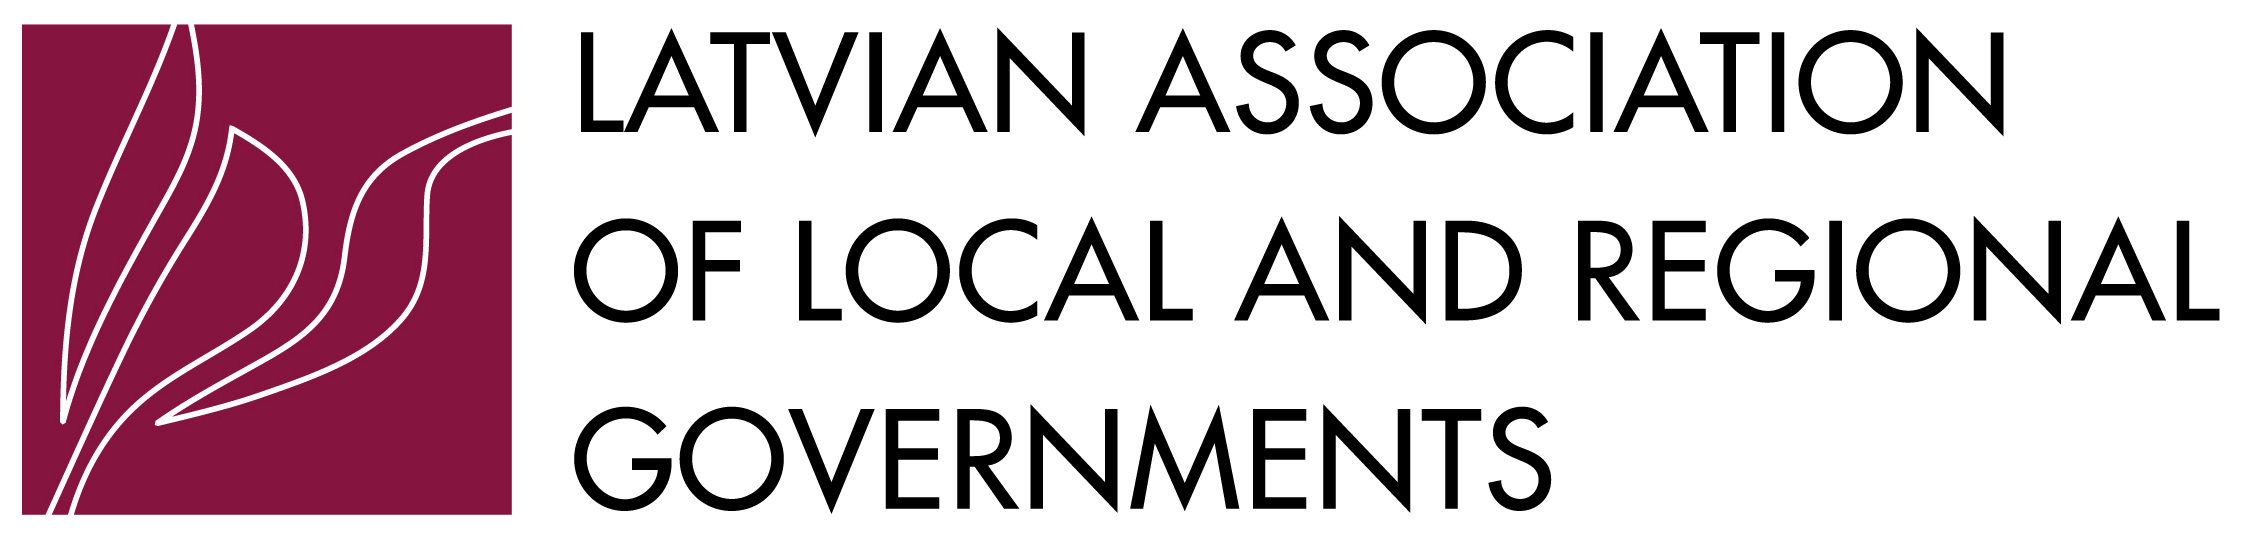 Latvian Association of Local and Regional Governments